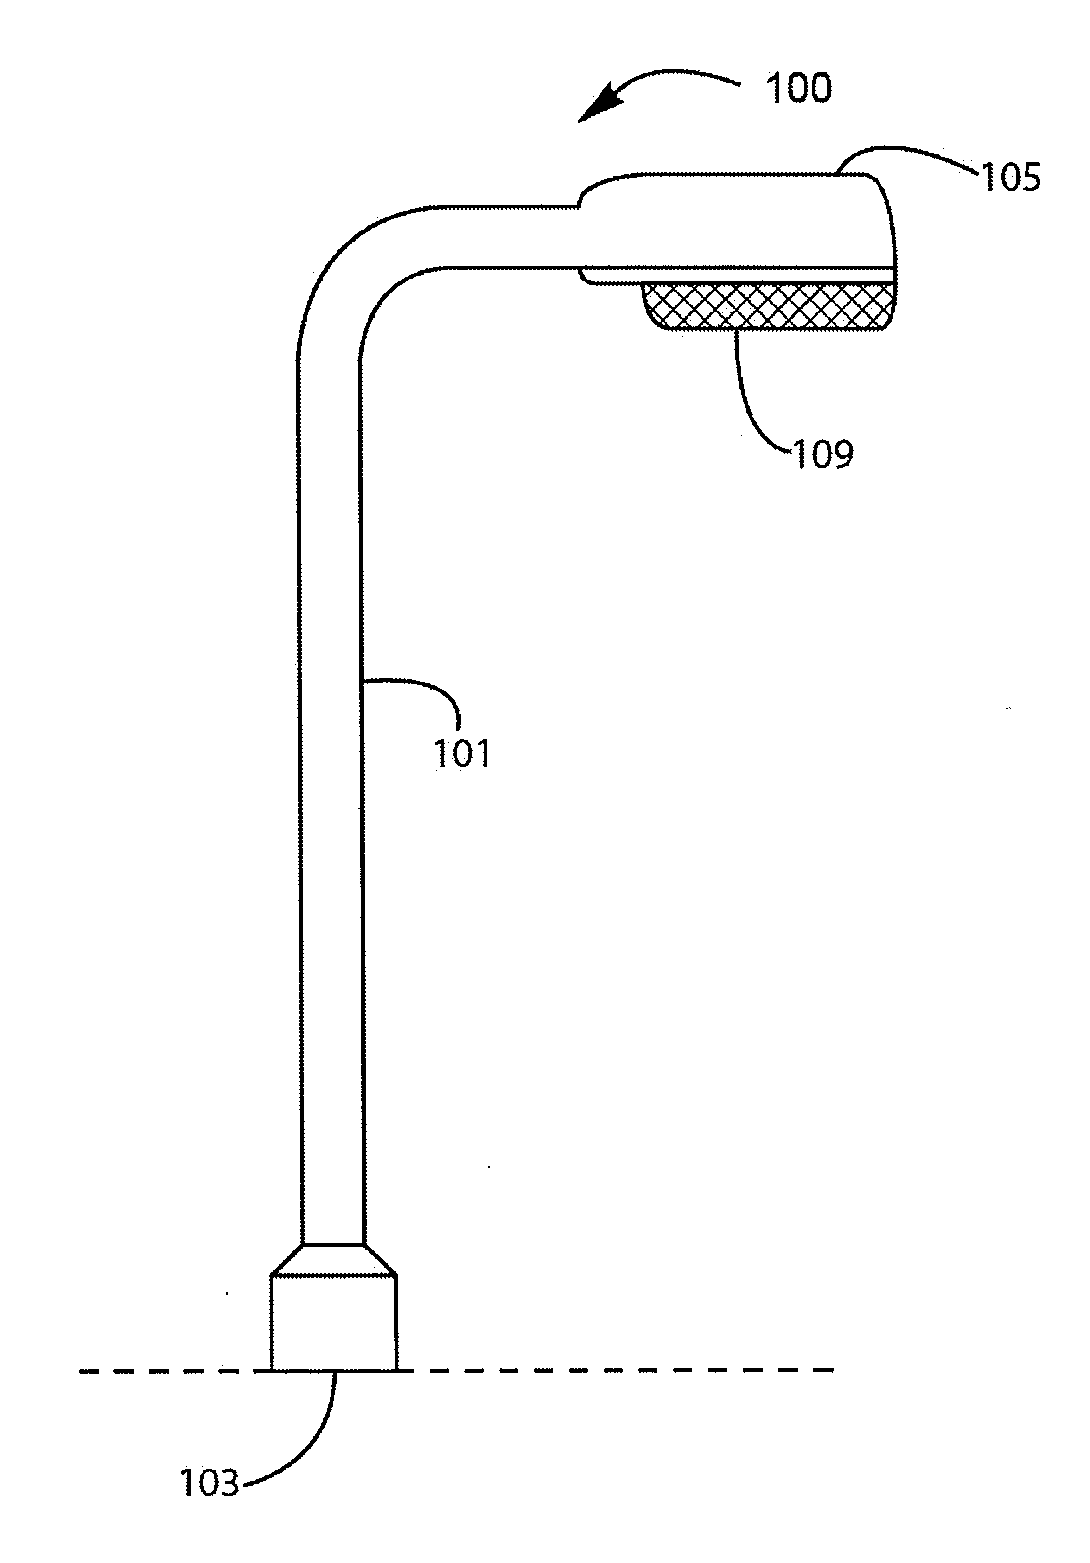 Method and System for Converting a Sodium Street Lamp to an Efficient White Light Source